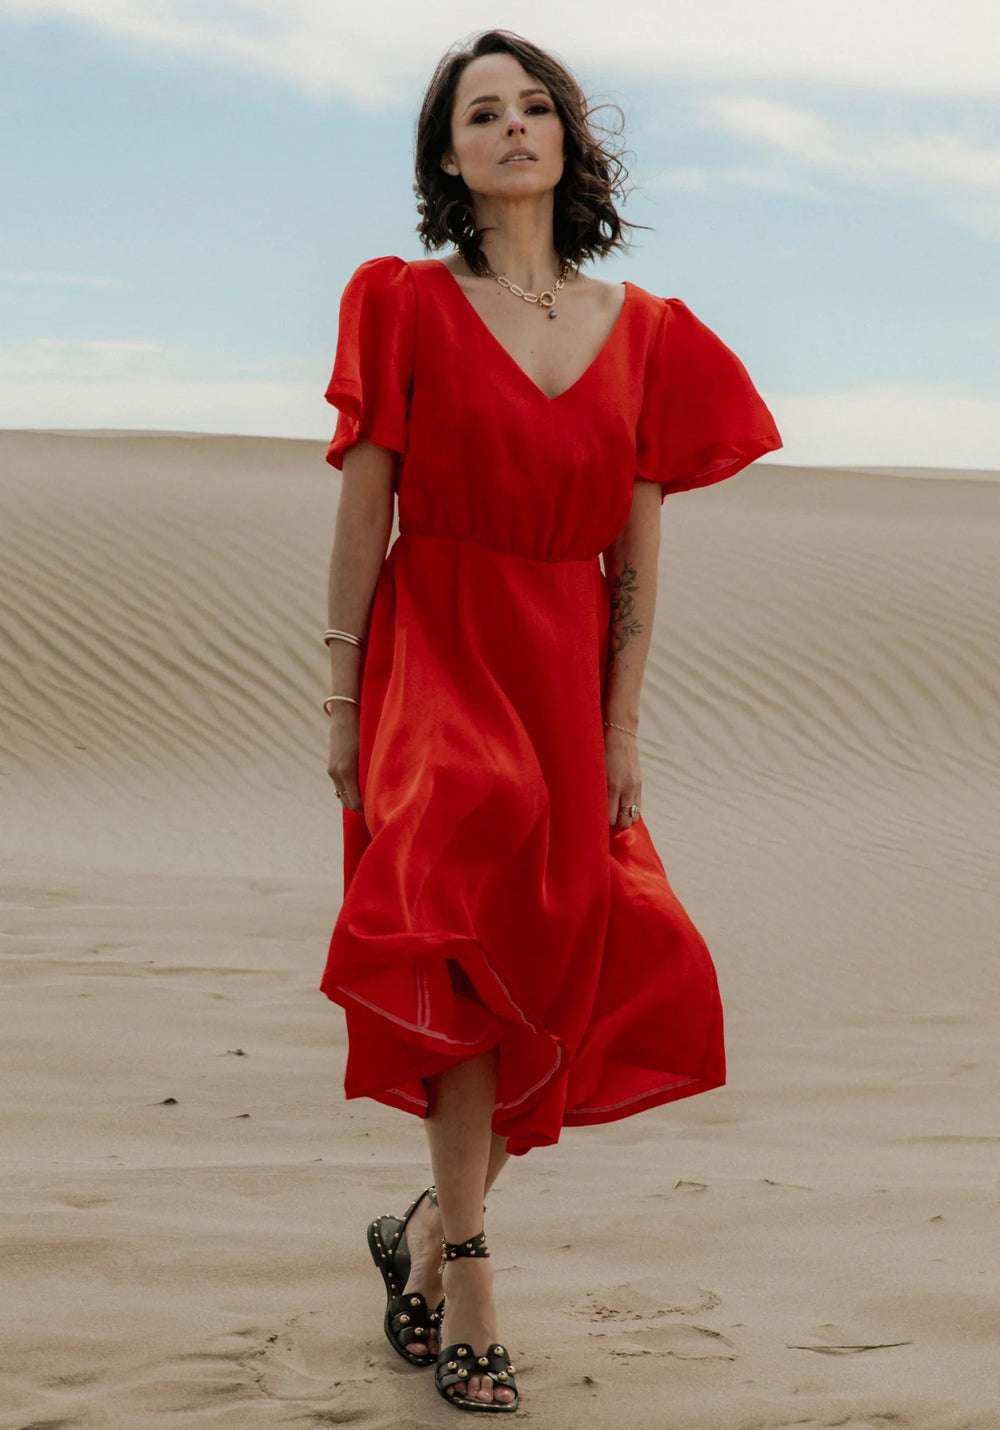 Woman wearing the Cuba Libre Dress sewing pattern from Maison Fauve on The Fold Line. A dress pattern made in woven fabrics with a soft drape including twill, viscose crepe or poplin, fine jacquard, or even lace fabric, featuring a v-neck, butterfly sleev